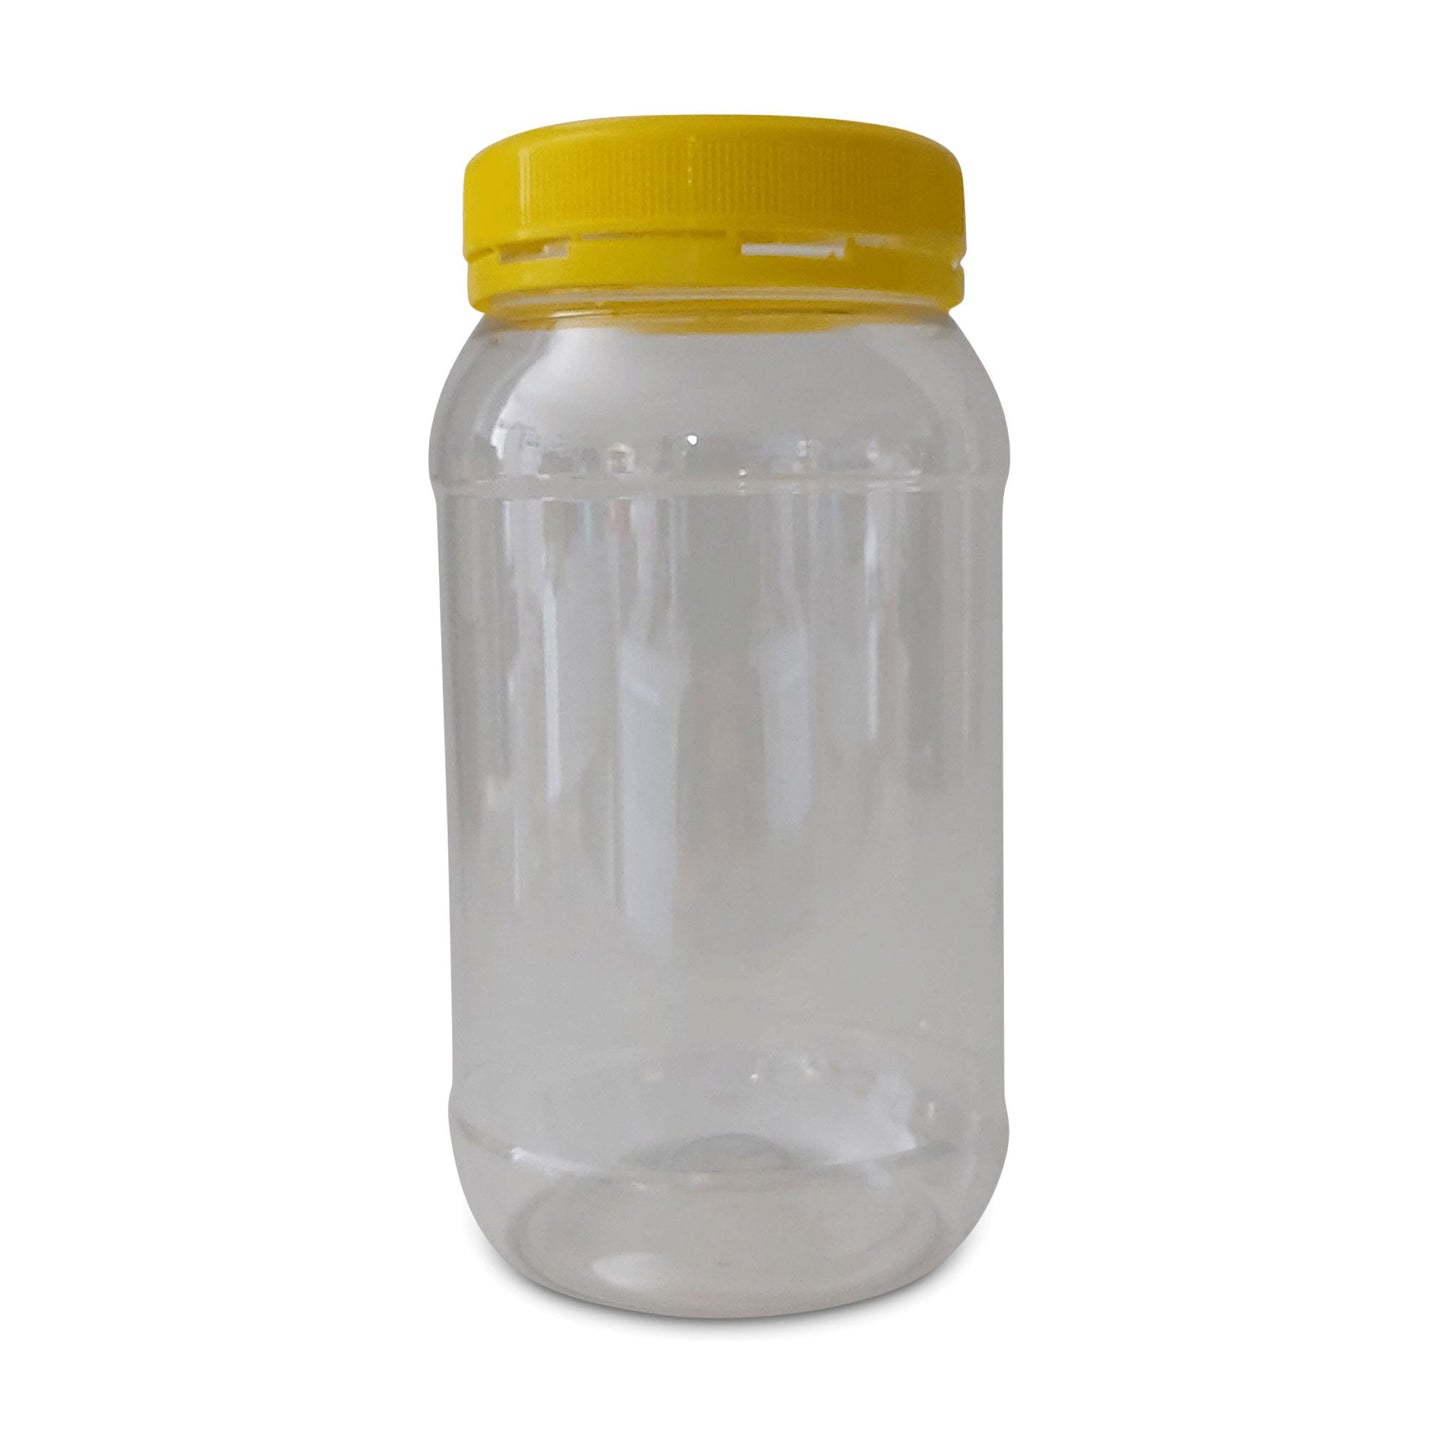 10x 1Kg Plastic Honey Jars + Lids - Round Clear Food Grade Packaging Containers